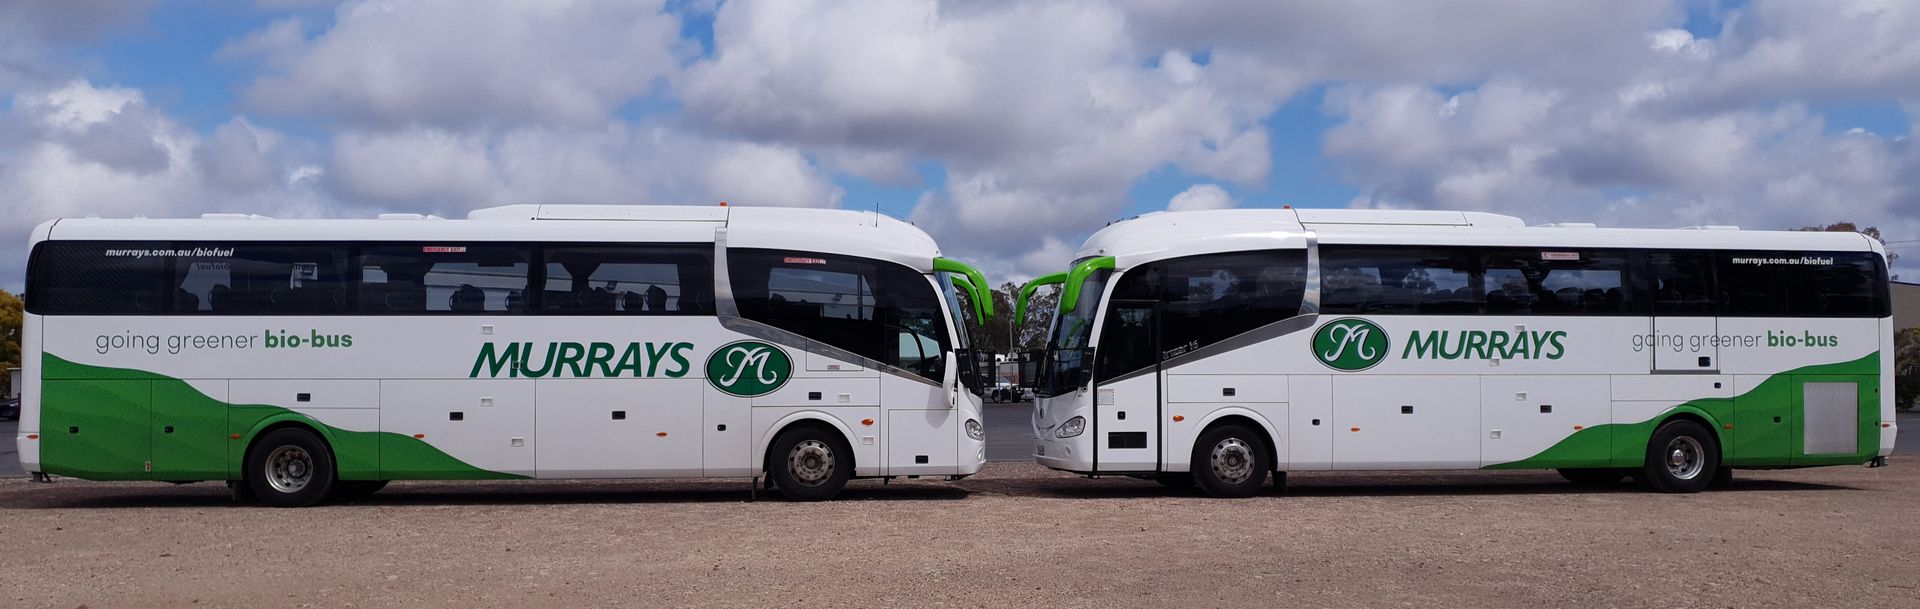 B100-delivery-to-murrays-coaches